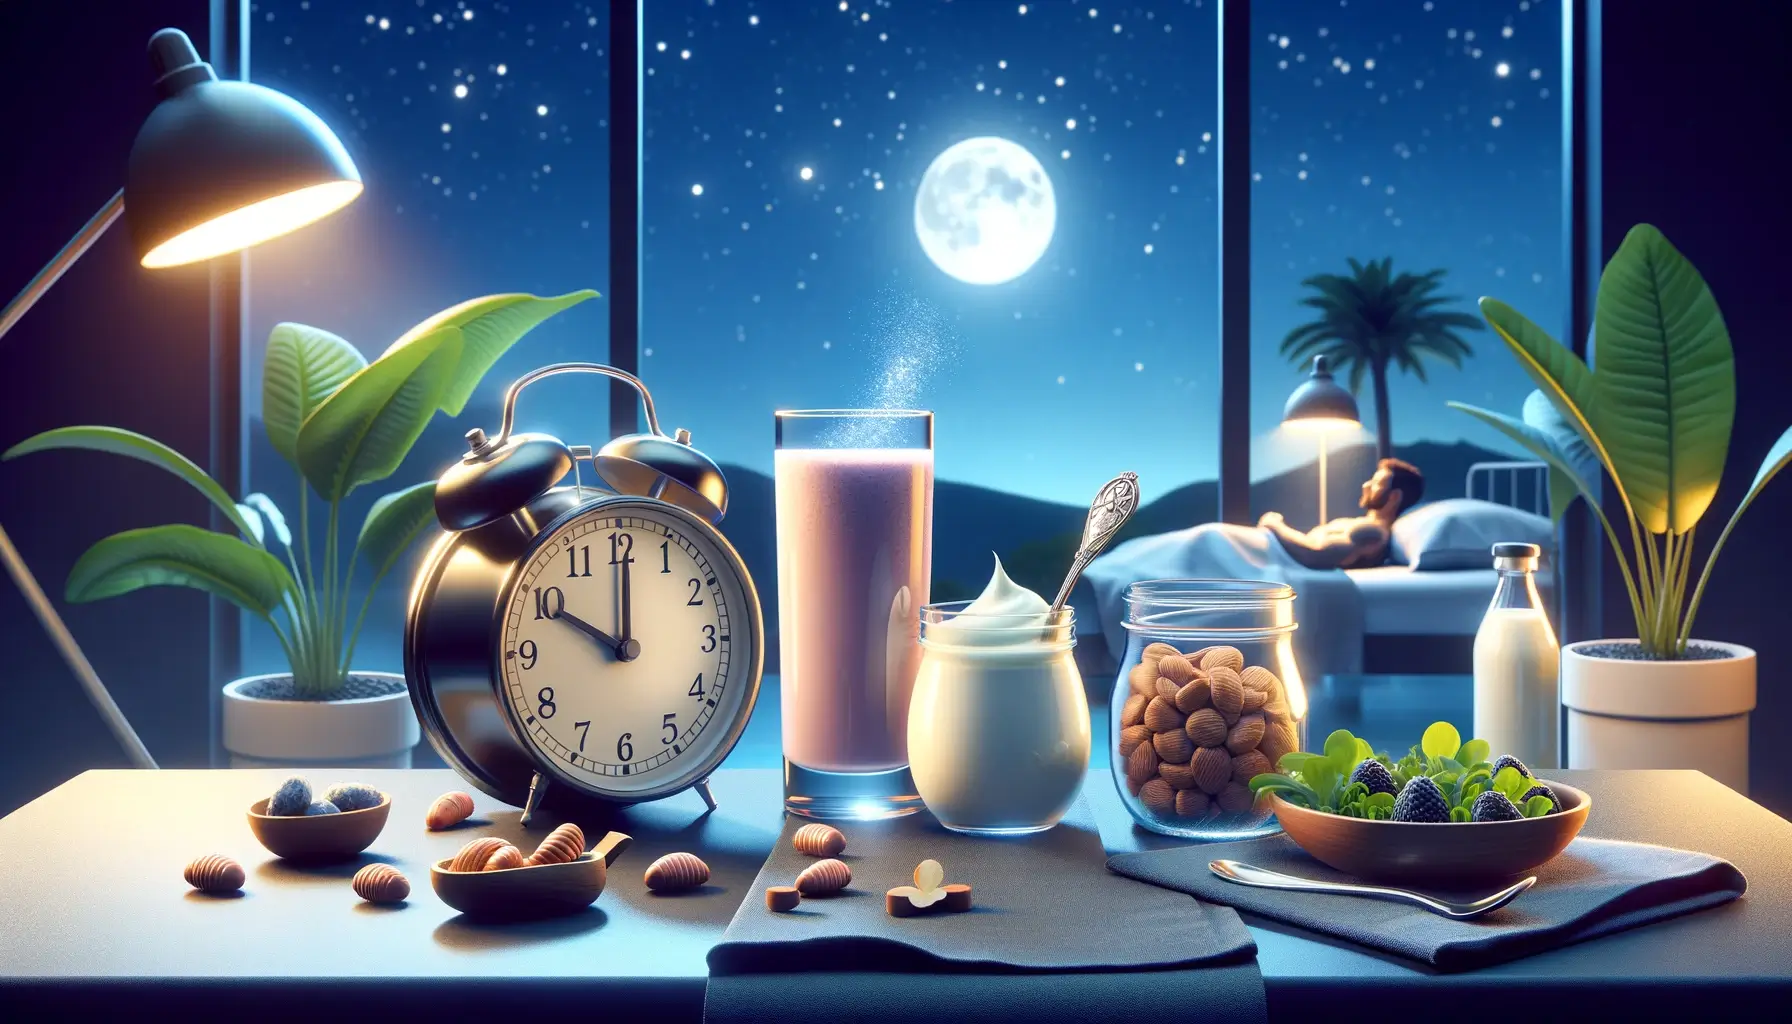 Nighttime scene with a clock showing night hours and a glass of protein shake, symbolizing the benefits of protein intake before bed for muscle growth